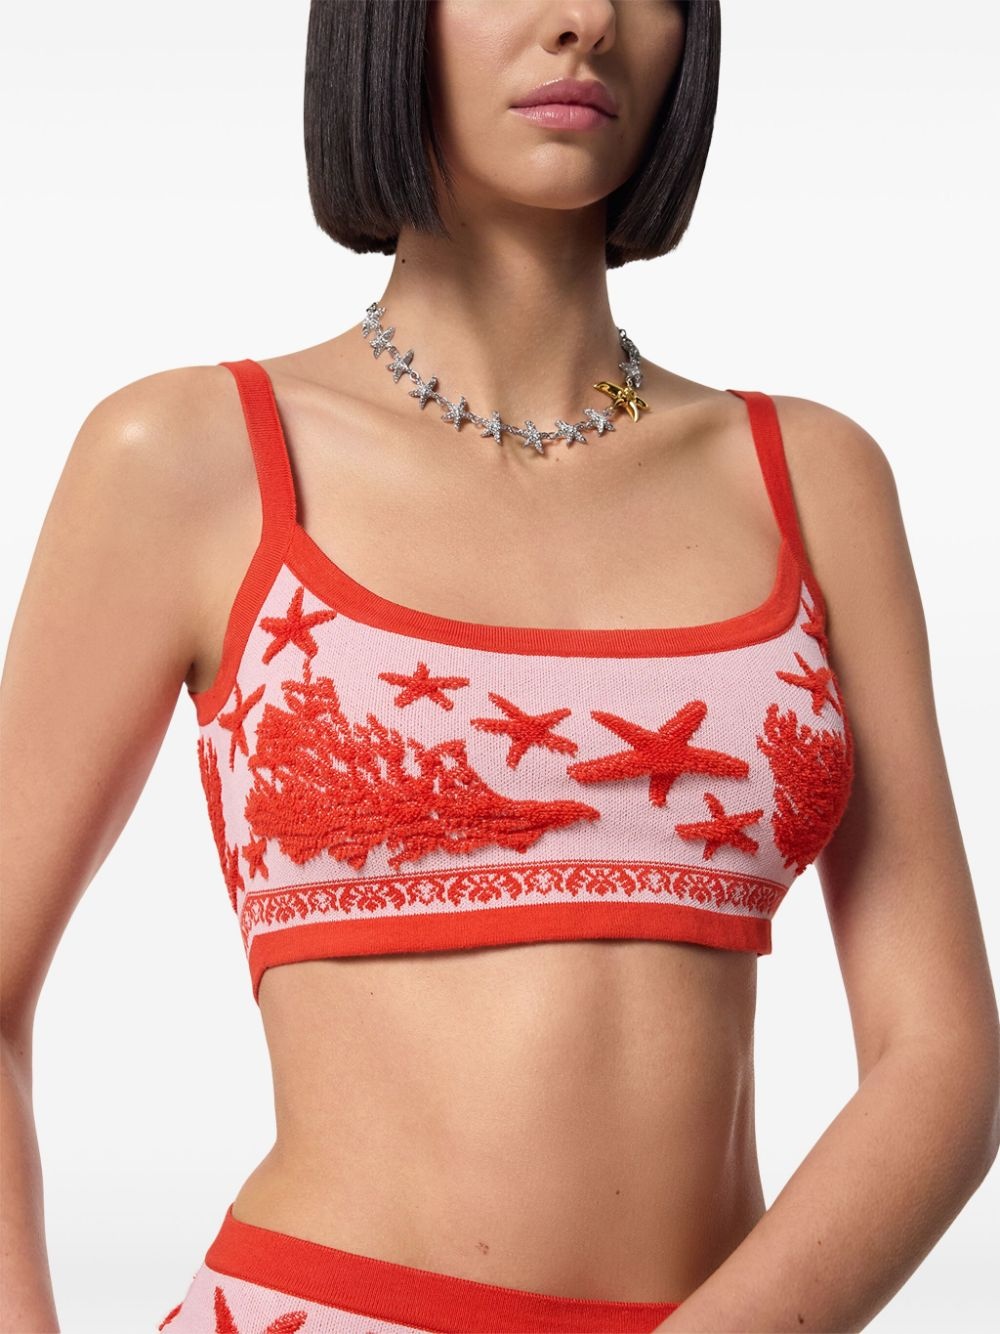 Barocco Sea knitted crop top - 5